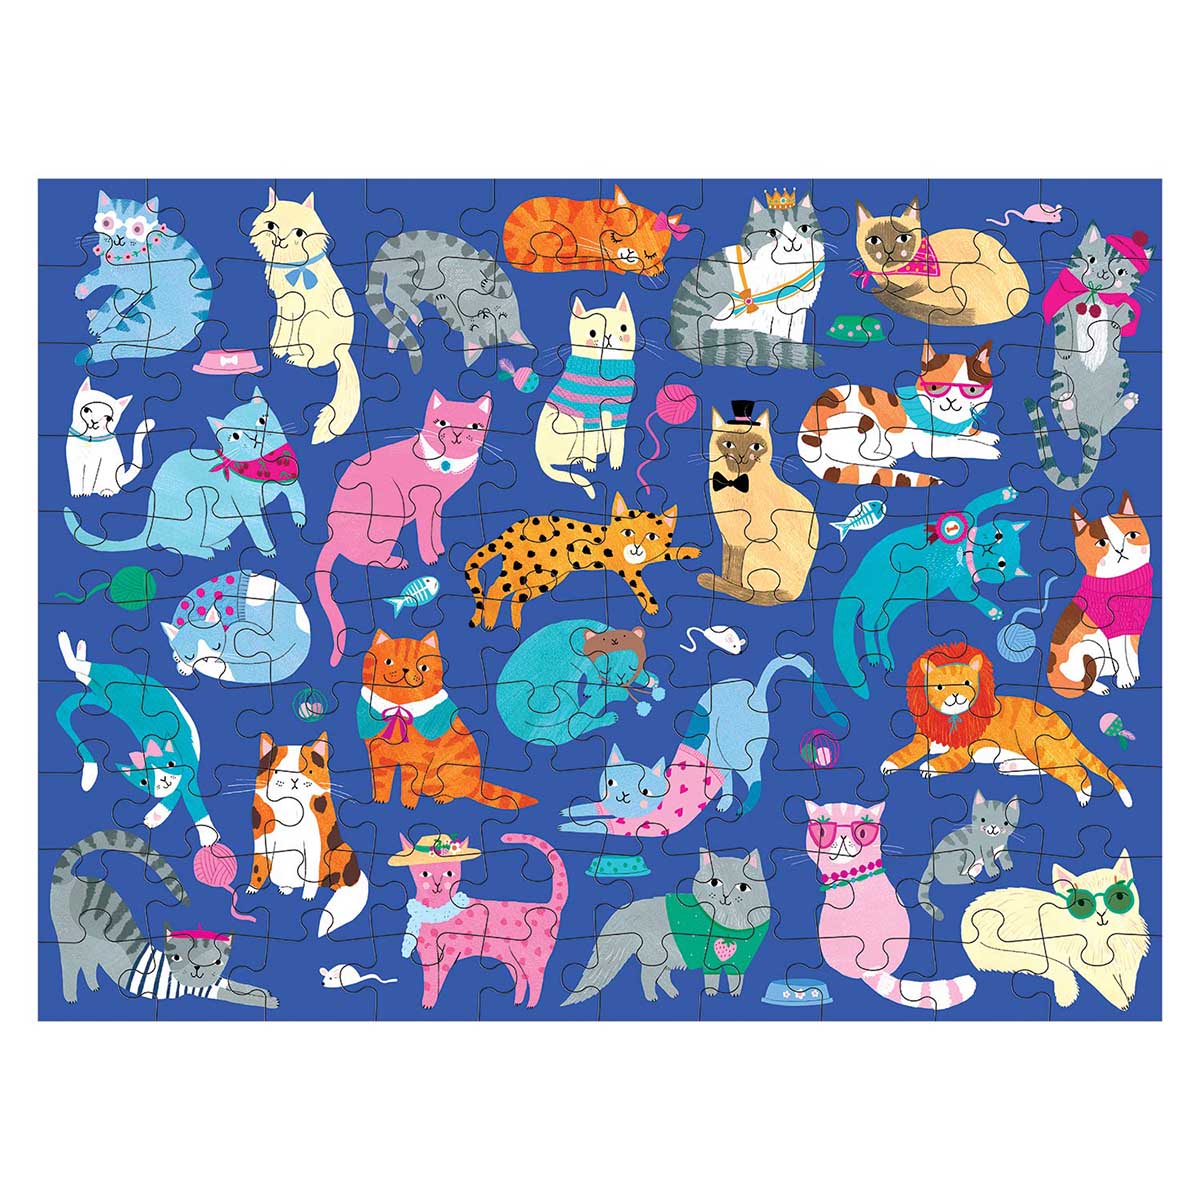 D-Toys Puzzles Dogs Cats Kittens Puppies Children/'s Jigsaw Puzzle Animal